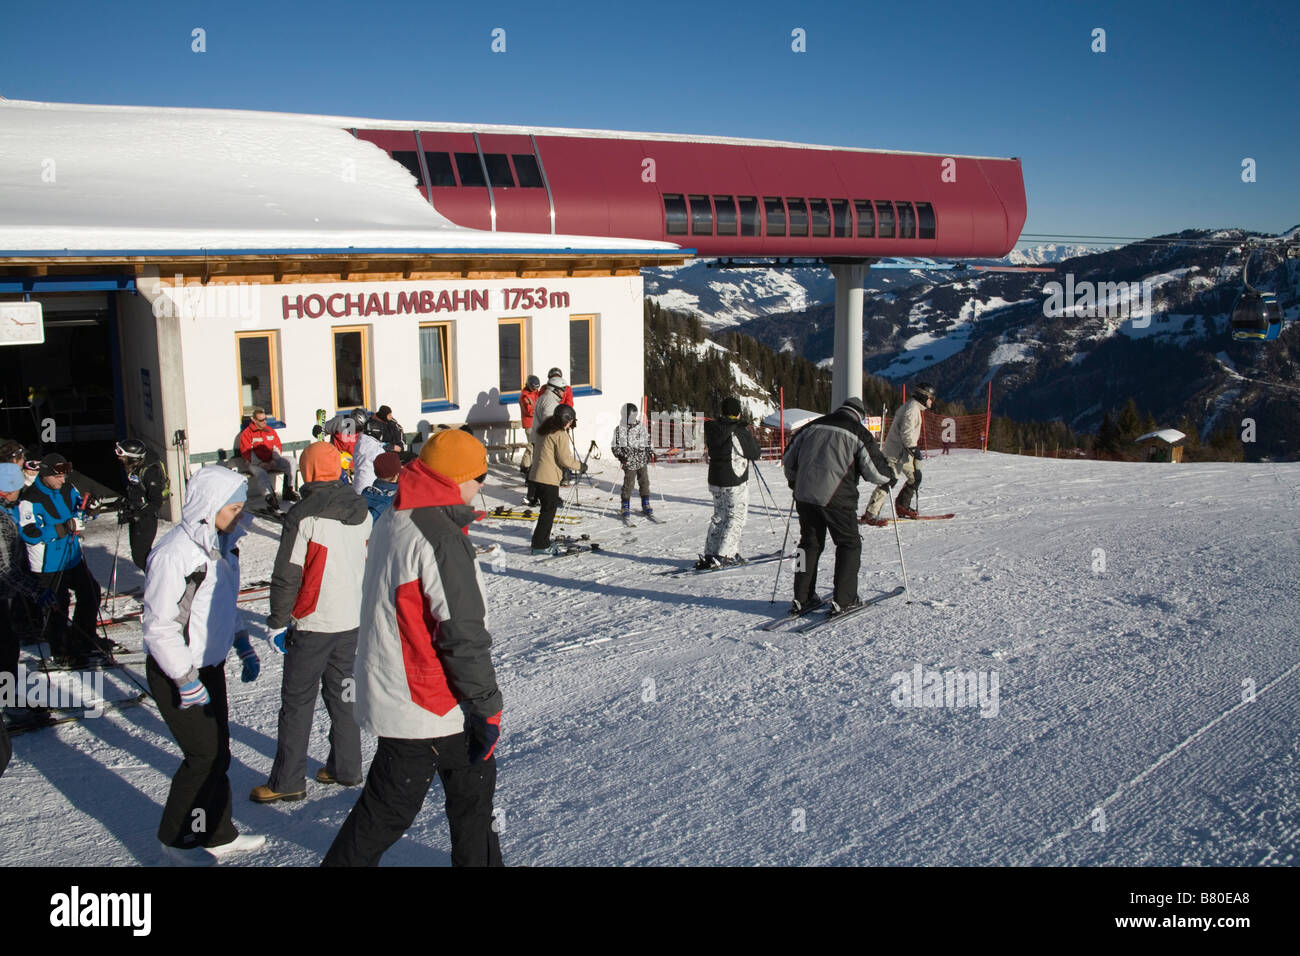 Rauris Austria EU January Skiers and walkers just arrived at the Hochalmbahn gondola station for the ski slopes Stock Photo